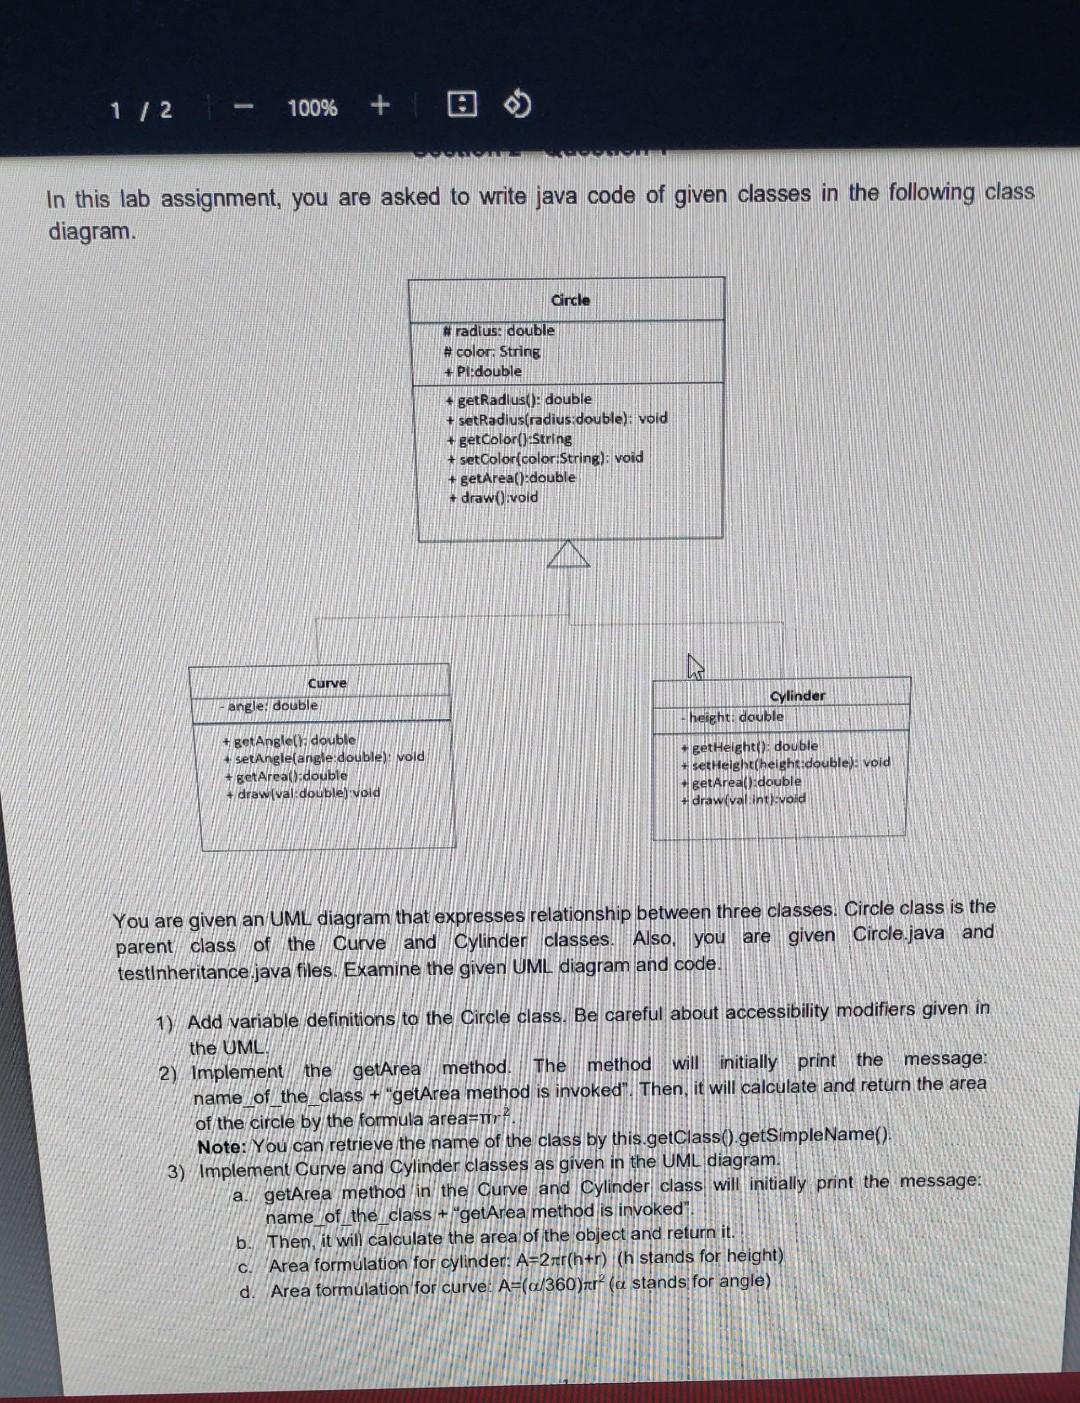 In this lab assignment, you are asked to write java code of given classes in the following class diagram. You are given an UML diagram that expresses relationship between three classes. Circle class is the parent class of the Curve and Cylinder classes. Also, you are given Circle.java and testlnheritance.java files. Examine the given UML diagram and code. 1) Add variable definitions to the Circle class. Be careful about accessibility modifiers given in the UML 2) Implement the getArea method. The method will initially print the message: name of the class + "getArea method is invoked". Then, it will calculate and return the area of the circle by the formula area =πr2. Note: You can retrieve the name of the class by this.getClass(). getSimpleName(). 3) Implement Curve and Cylinder classes as given in the UML diagram. a. getArea method in the Curve and Cylinder class will initially print the message: name of the class + "getArea method is invoked". b. Then, it will calculate the area of the object and return it. c. Area formulation for cylinder: A=2πr(h+r) ( h stands for height) d. Area formulation for curve: A=(α/360)πr2 ( α stands for angle) e. draw method of Curve and Cylinder classes will initially call the parent class' draw method. Note: Your can access the method of the parent class by super.method() f. Then, it will print one of the following strings: "This method is overloaded with an double parameter the value is: " + val "This method is overloaded with an int parameter the value is: " + val 4) Complete the testinheritance class to produce the following output. Add calls to getArea and draw methods and print the calculated areas. Note: Do not forget to add variable definitions and implement getters and setters in all classes. Expected Output: Circle getarea method is invoked Circle area value is: 78.5 Cylinder getarea method is invoked Cylinder area value is: 351.68 Curve getarea method is invoked Curve area value is: 2.3549999999999995 Circle draw method is invoked cylinder draw method is invoked Cylinder draw method is invoked This method is overloaded with an int parameter the value is: 20 Curve draw method is invoked Curve draw method is invoked Curve draw method is invoked This method is overloaded with an double parameter the value is: 10.8